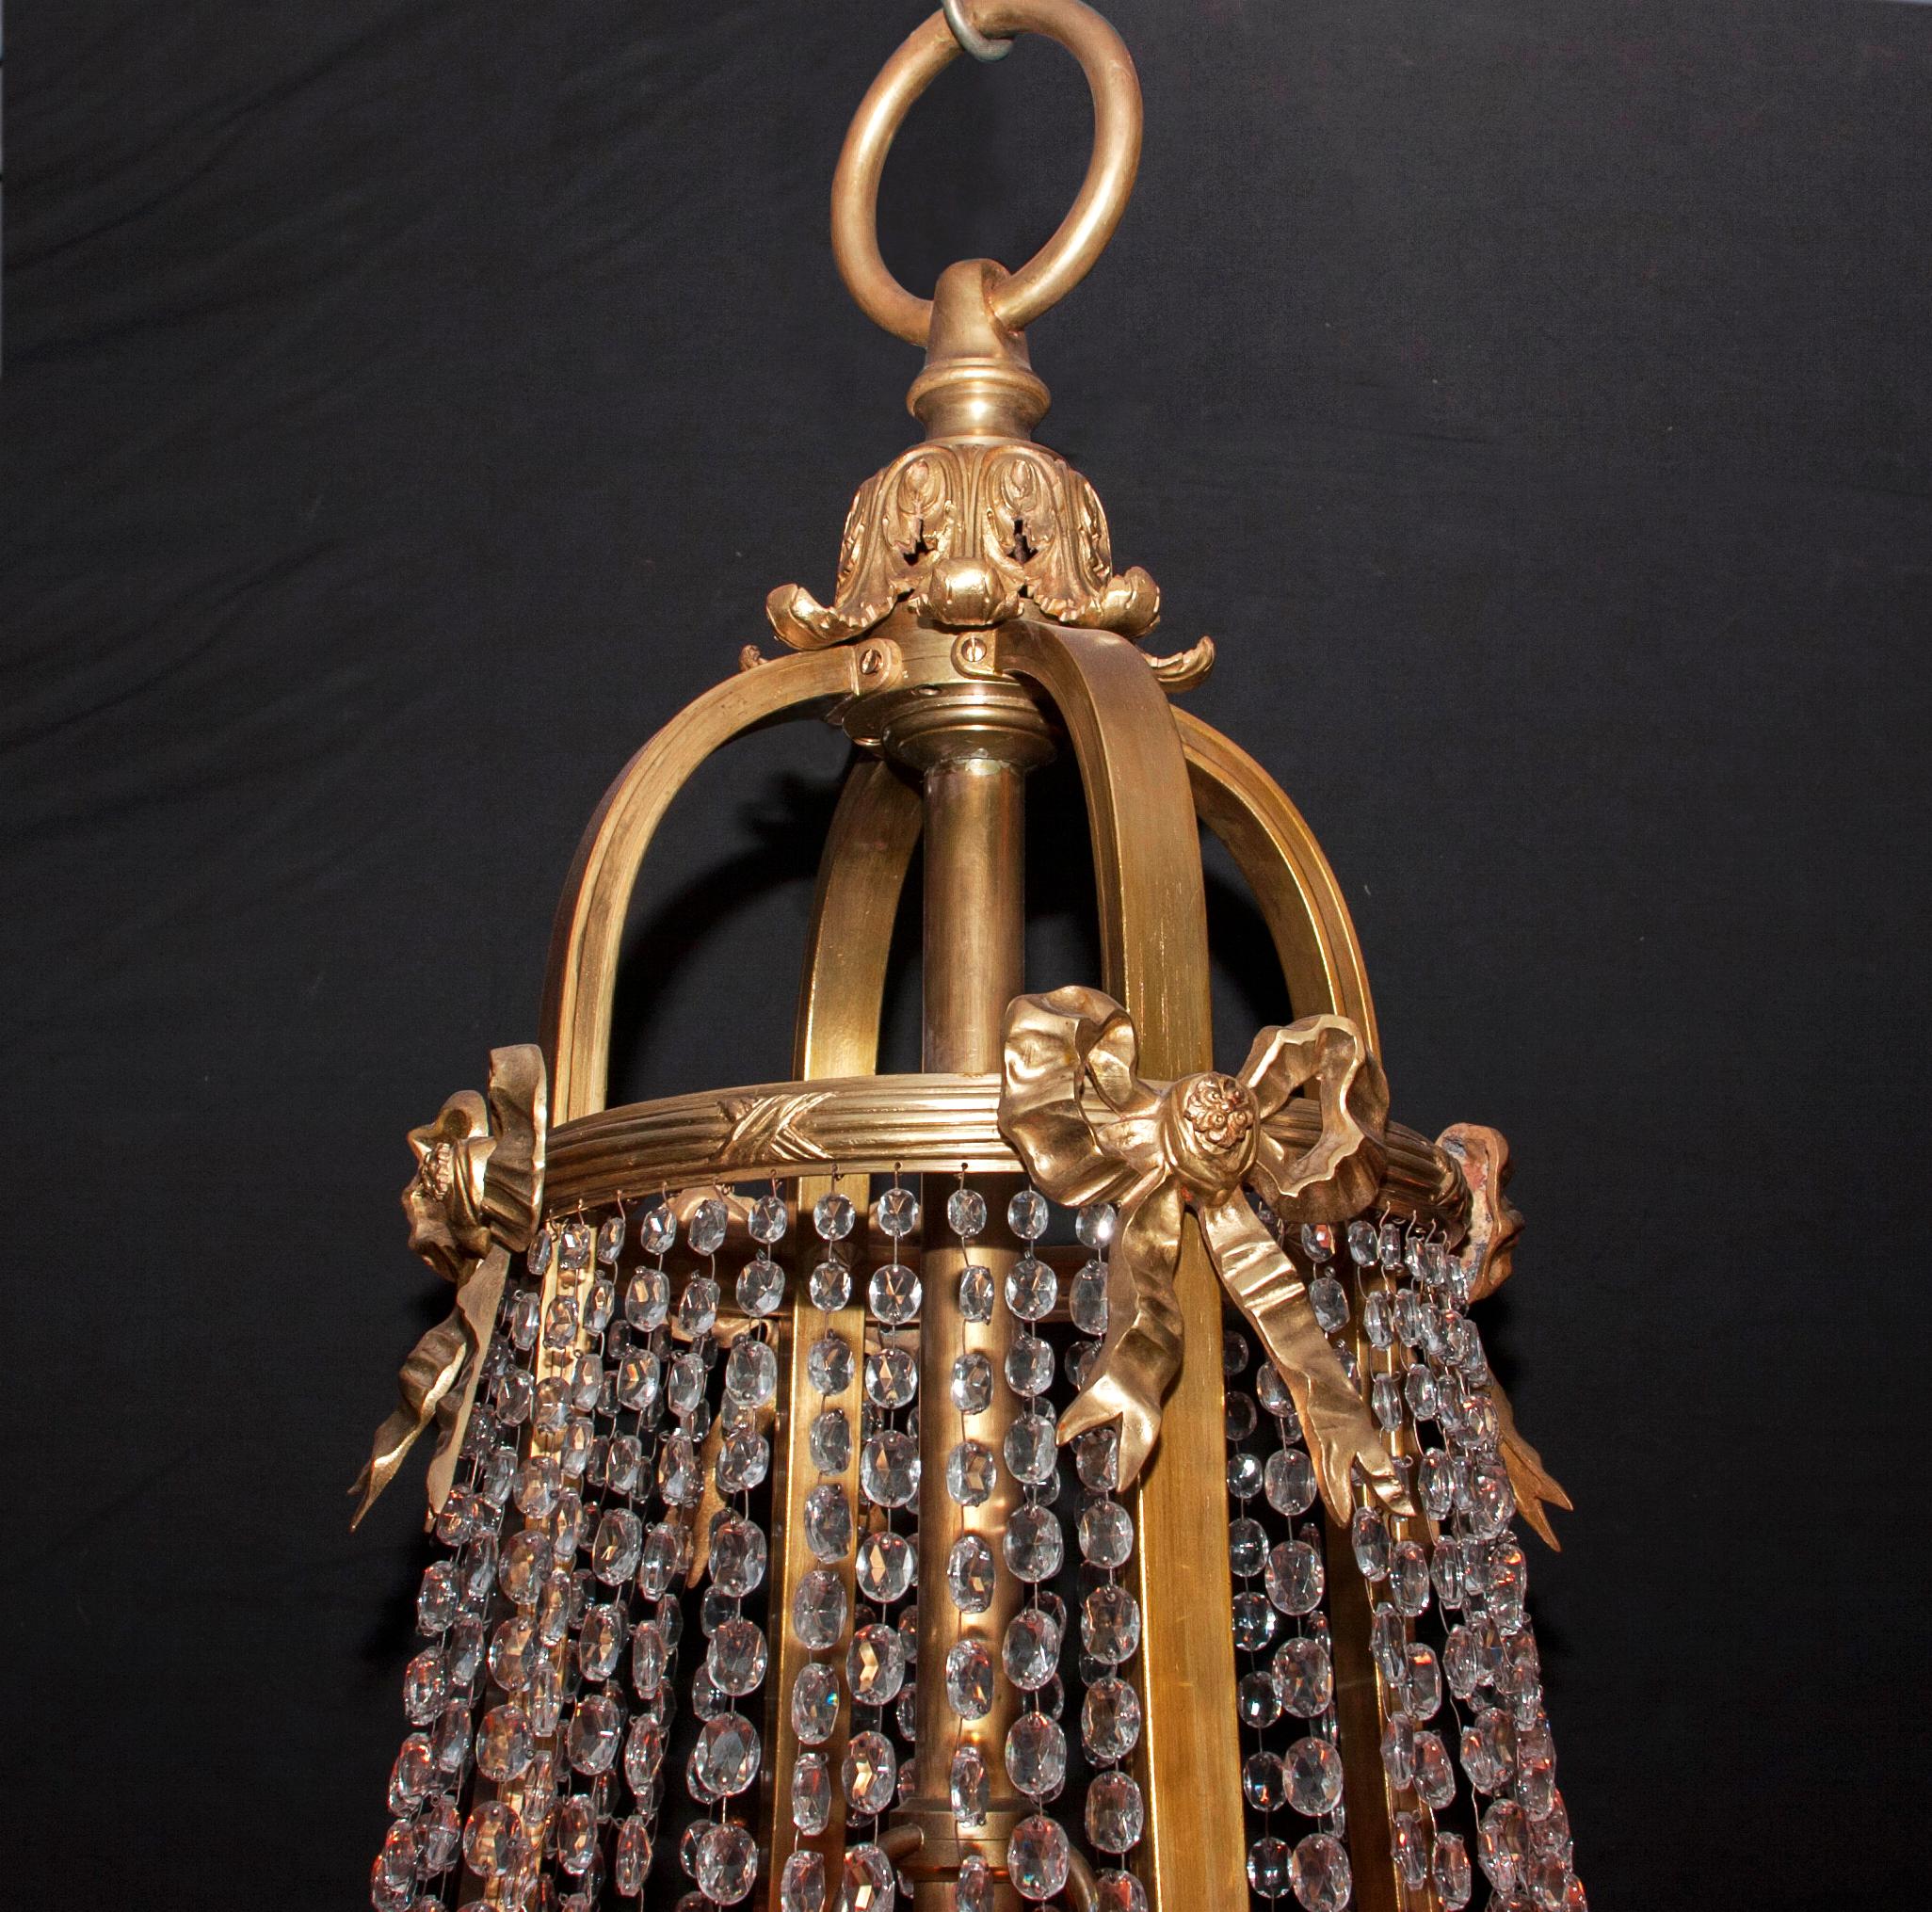 Pair of Large, Grand Louis XVI Bronze & Crystal Chandeliers, 19th Century French For Sale 5